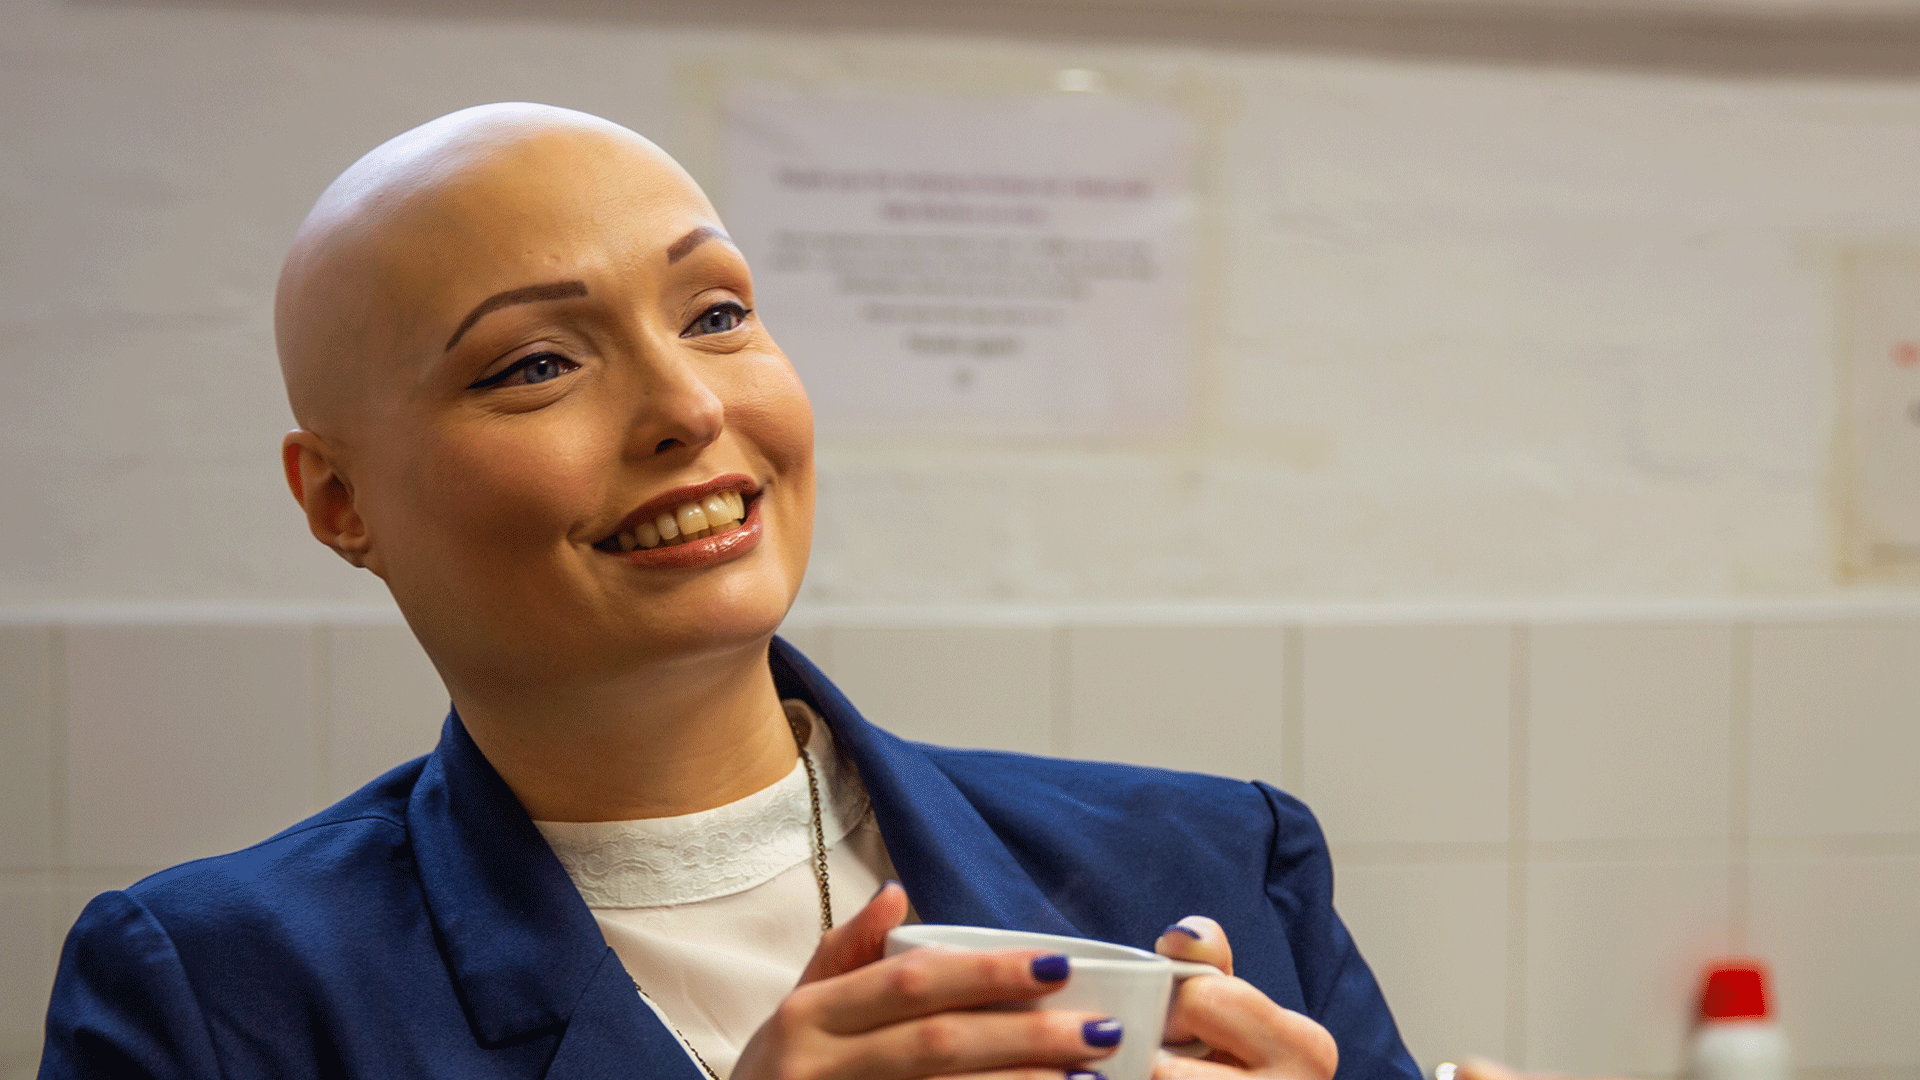 A woman with alopecia and holding a cup, smiles to someone off camera